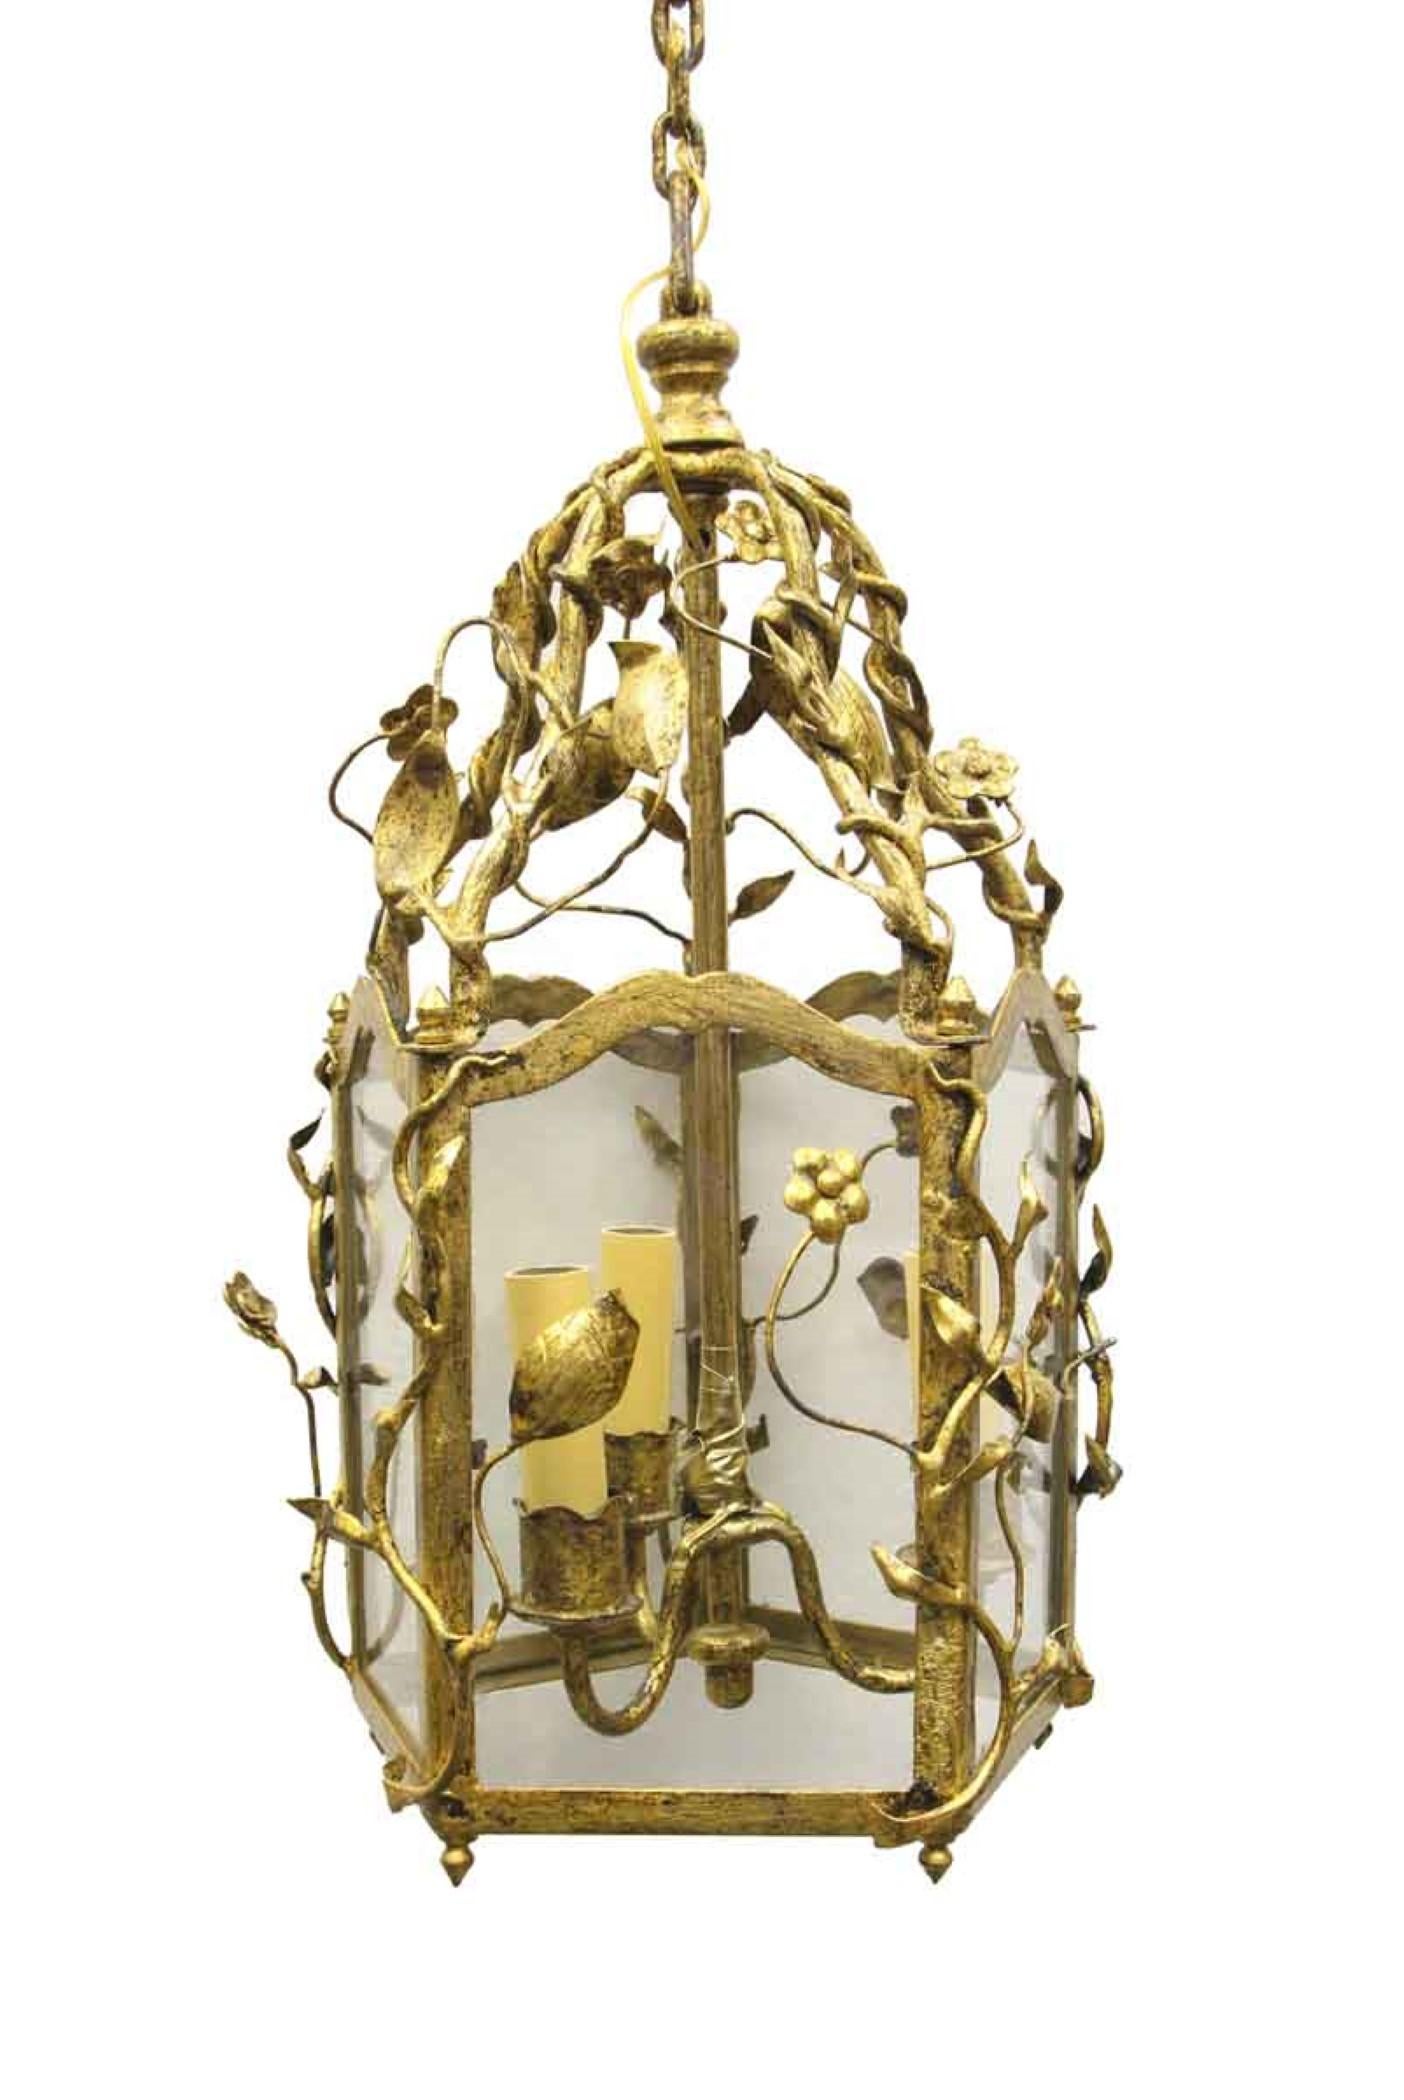 20th century Italian lantern with a gold gilt finish and three candlestick lights done in floral and foliage. From the foyers of the suites of the 39th floor of the NYC Waldorf Astoria Towers. Cleaned and rewired. Waldorf Astoria authenticity card